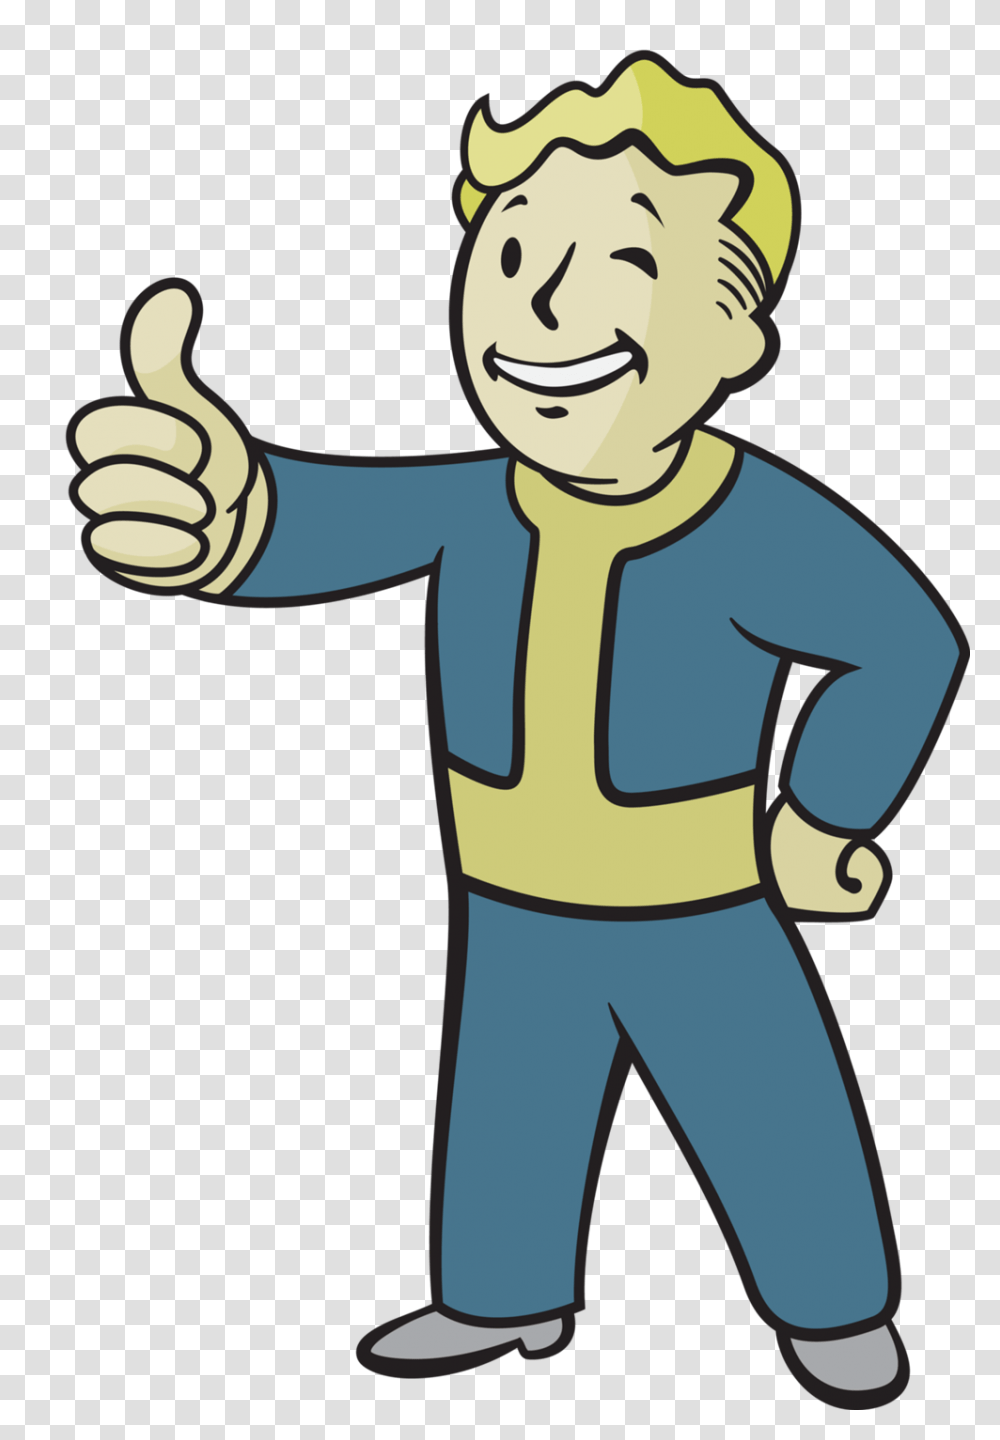 Vault Boy From Fallout Video Game Iconography, Thumbs Up, Finger, Hand Transparent Png